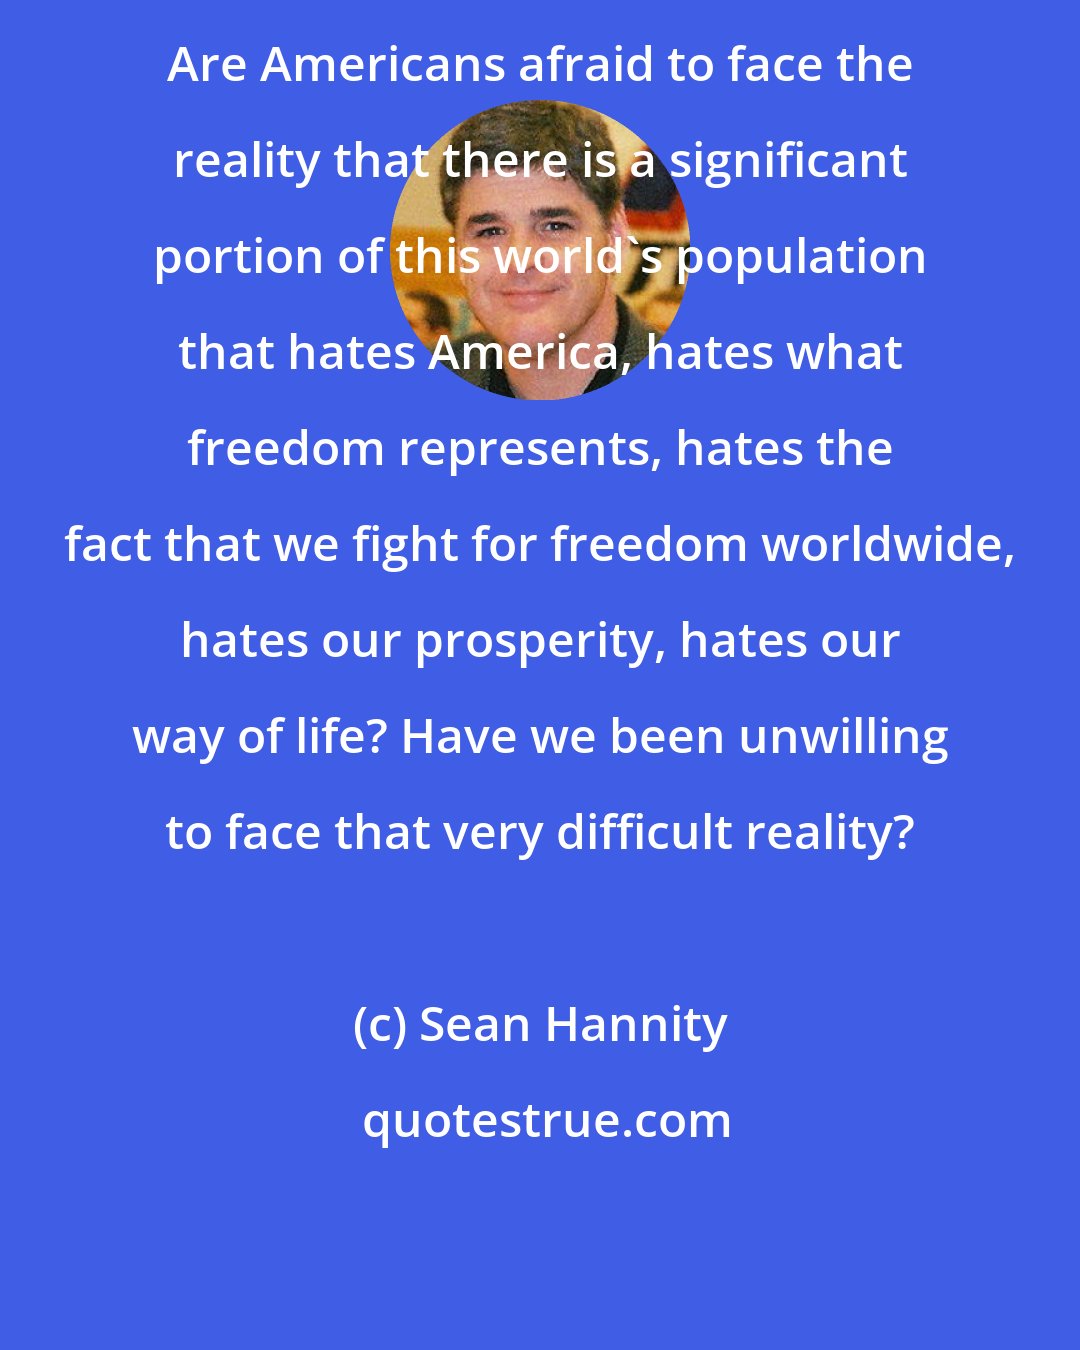 Sean Hannity: Are Americans afraid to face the reality that there is a significant portion of this world's population that hates America, hates what freedom represents, hates the fact that we fight for freedom worldwide, hates our prosperity, hates our way of life? Have we been unwilling to face that very difficult reality?